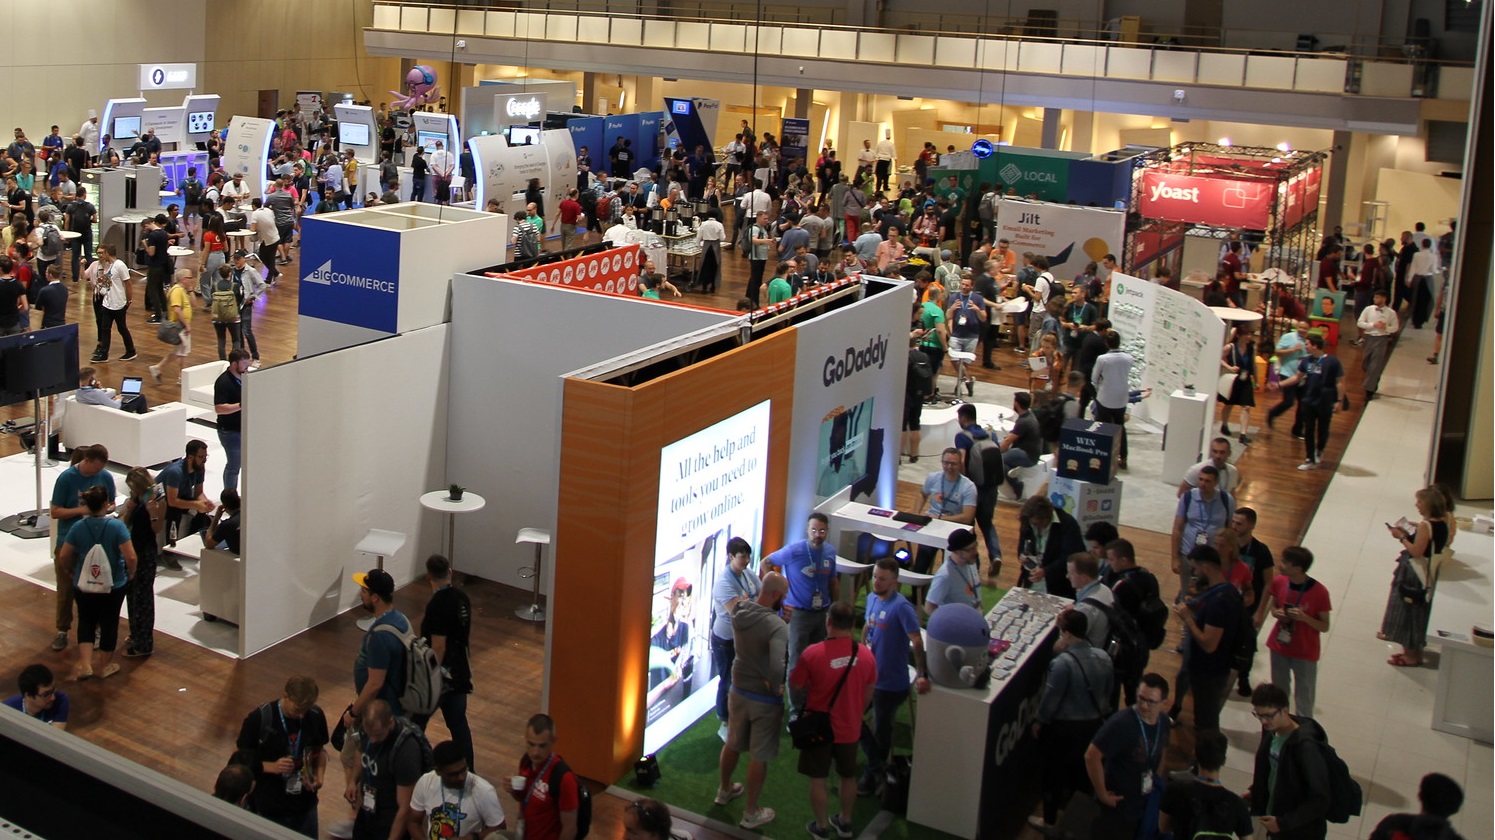 Looking down on the exhibitors at WCEU 2019 in Berlin.